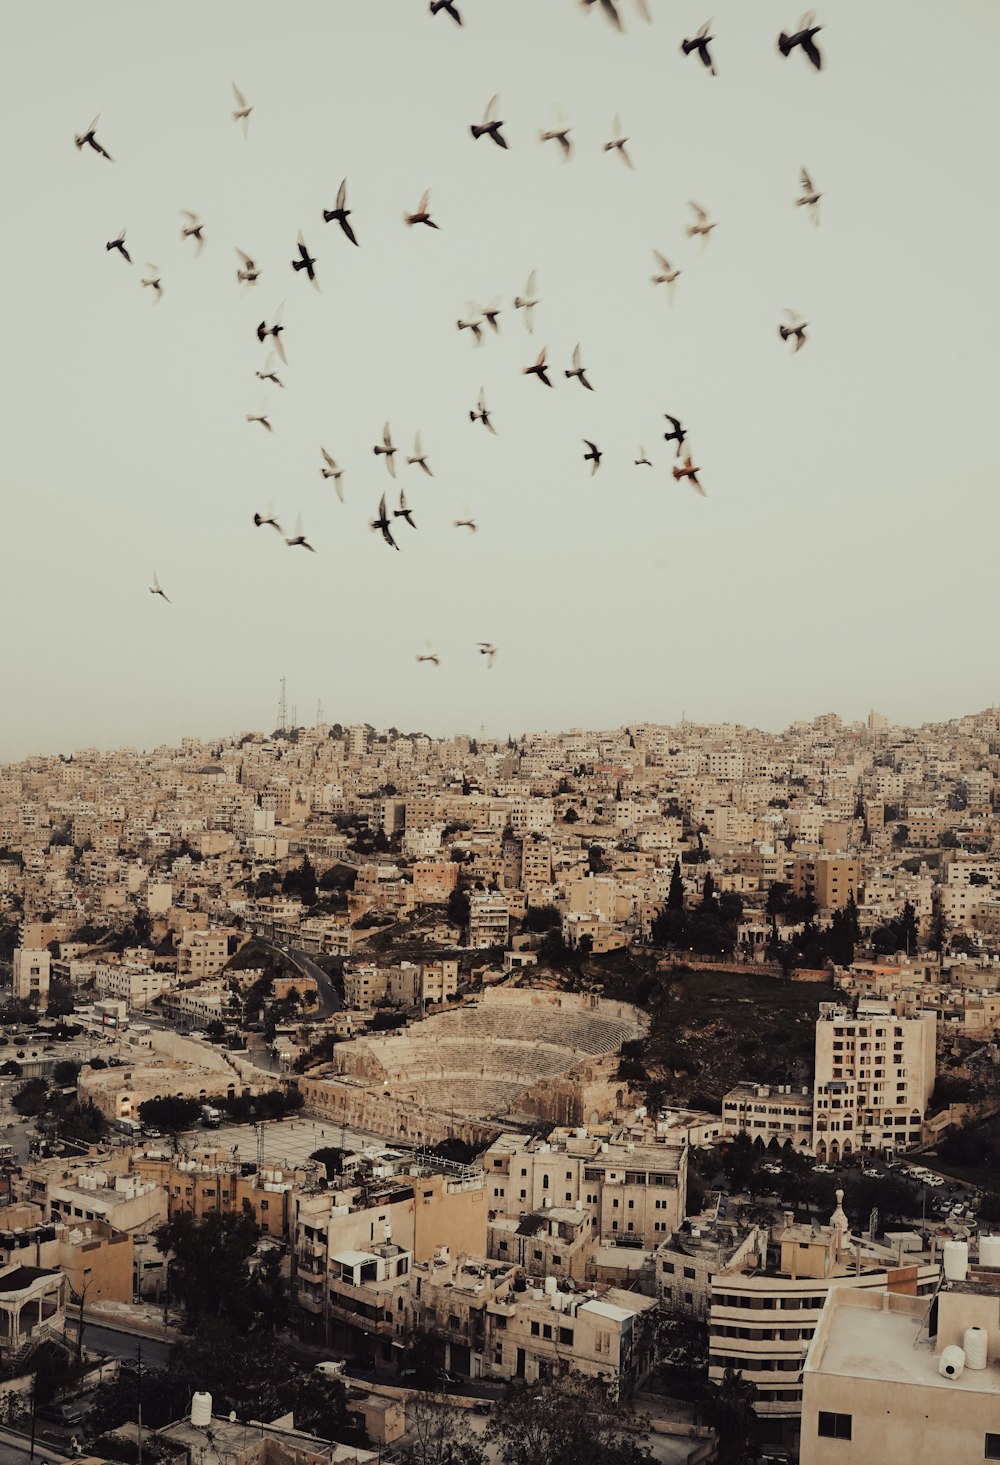 a flock of birds flying over a city